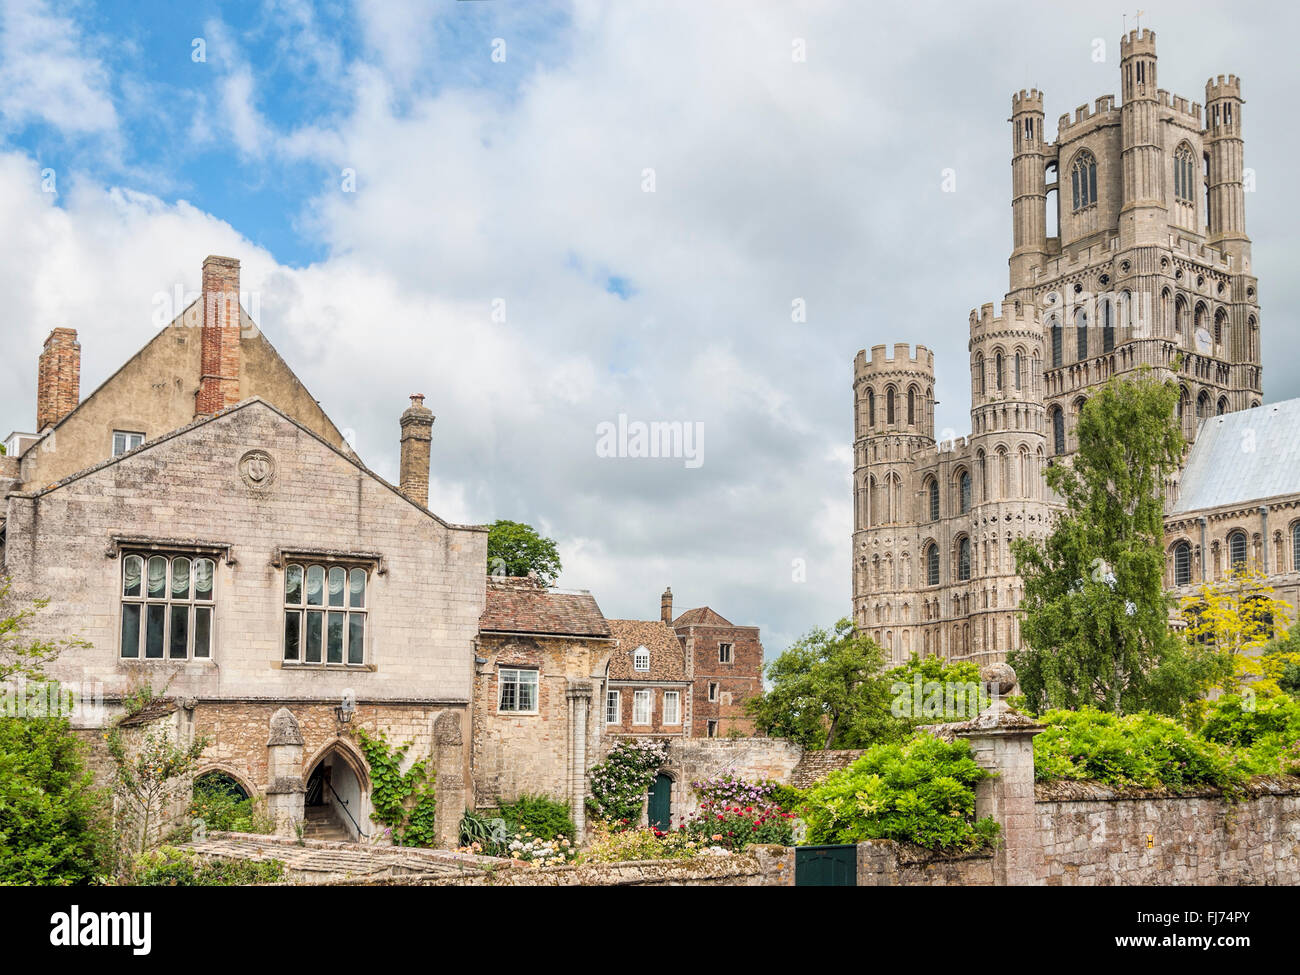 Cathedral Church of Ely, bekannt als die 'Ship of the Fens', Cambridgeshire, England Stockfoto